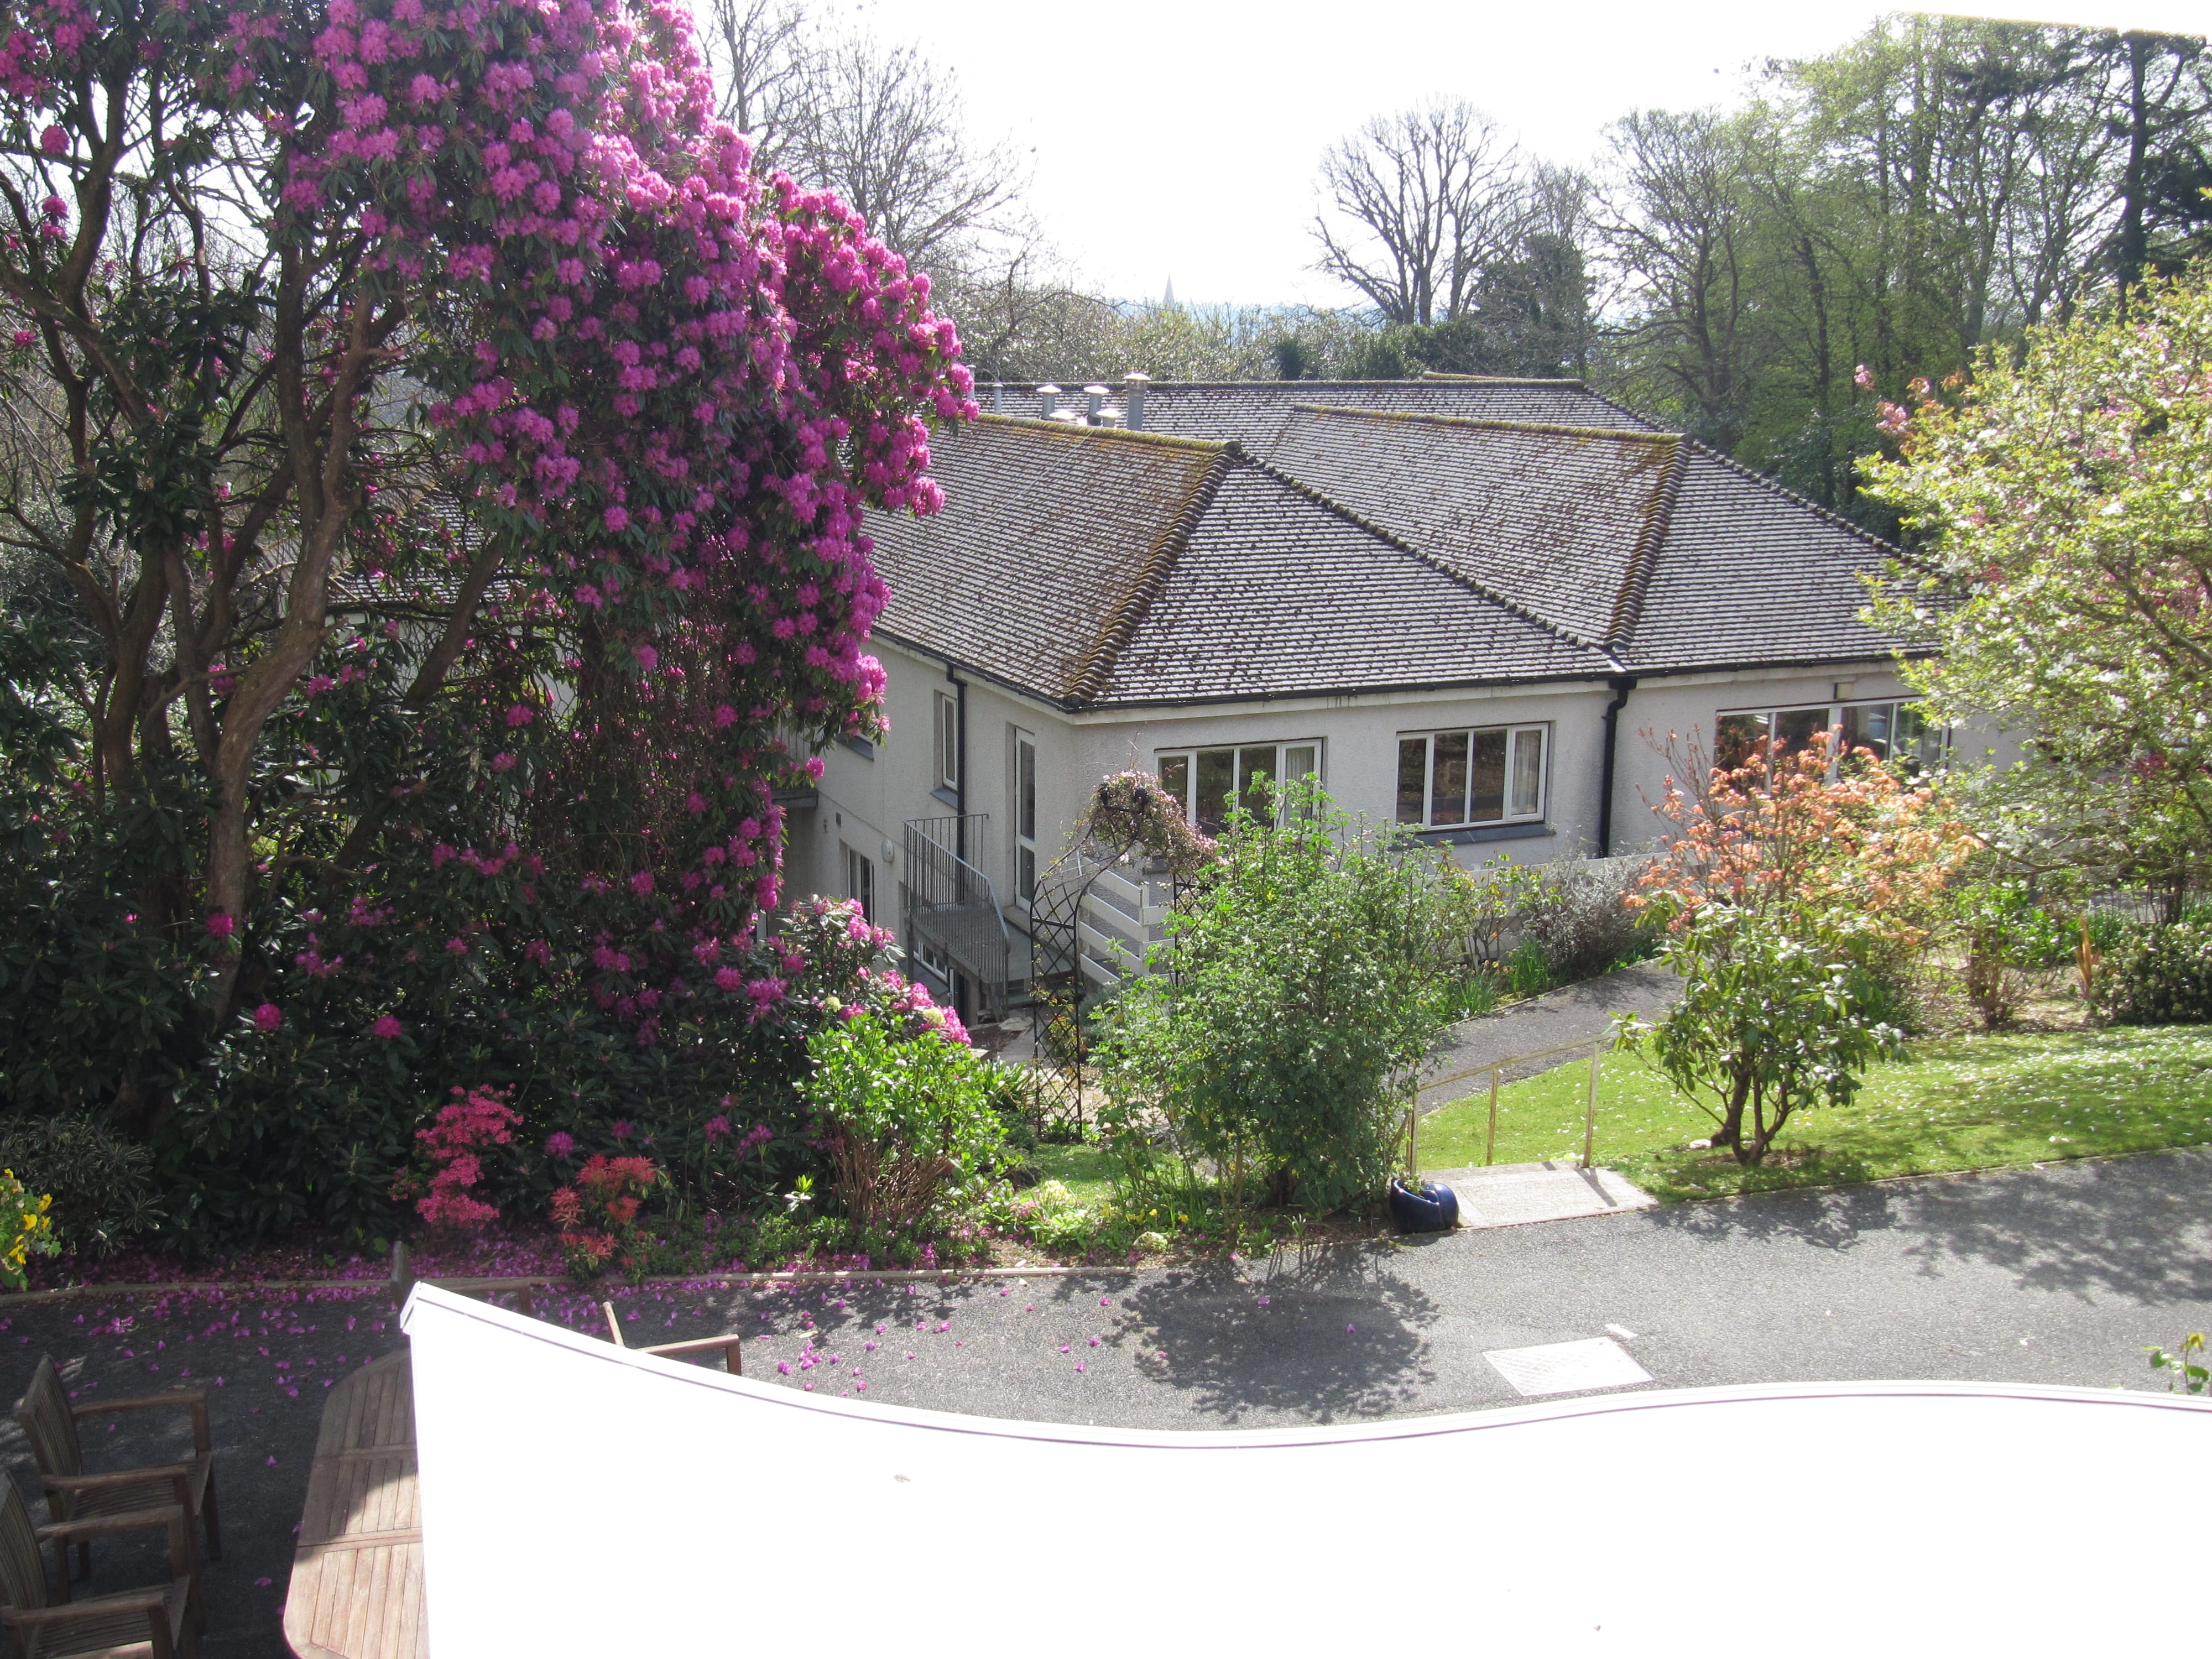 Cathedral View Residential and Nursin Home, Truro, Cornwall